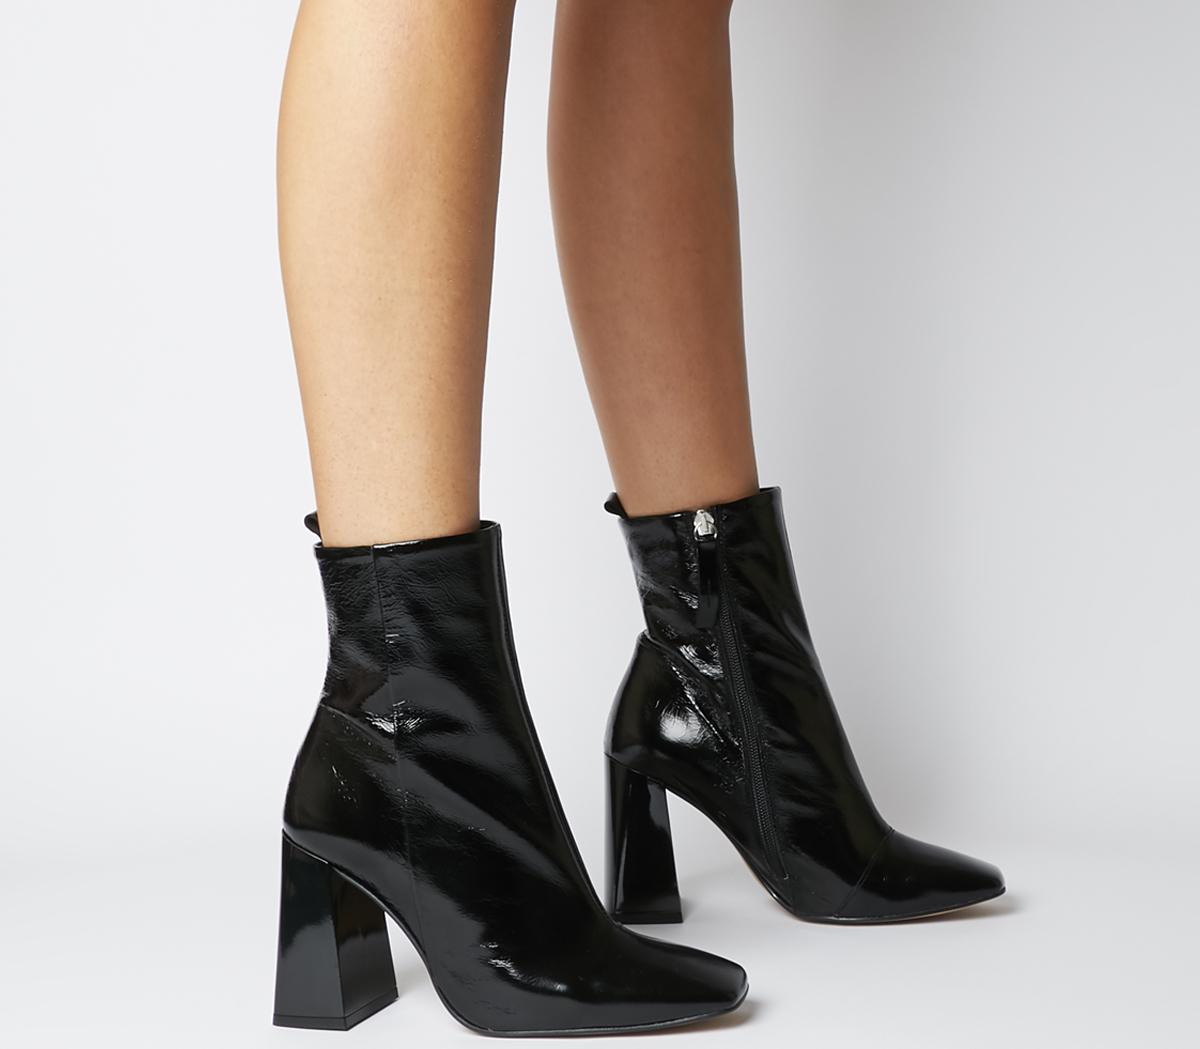 black high heel boots ankle